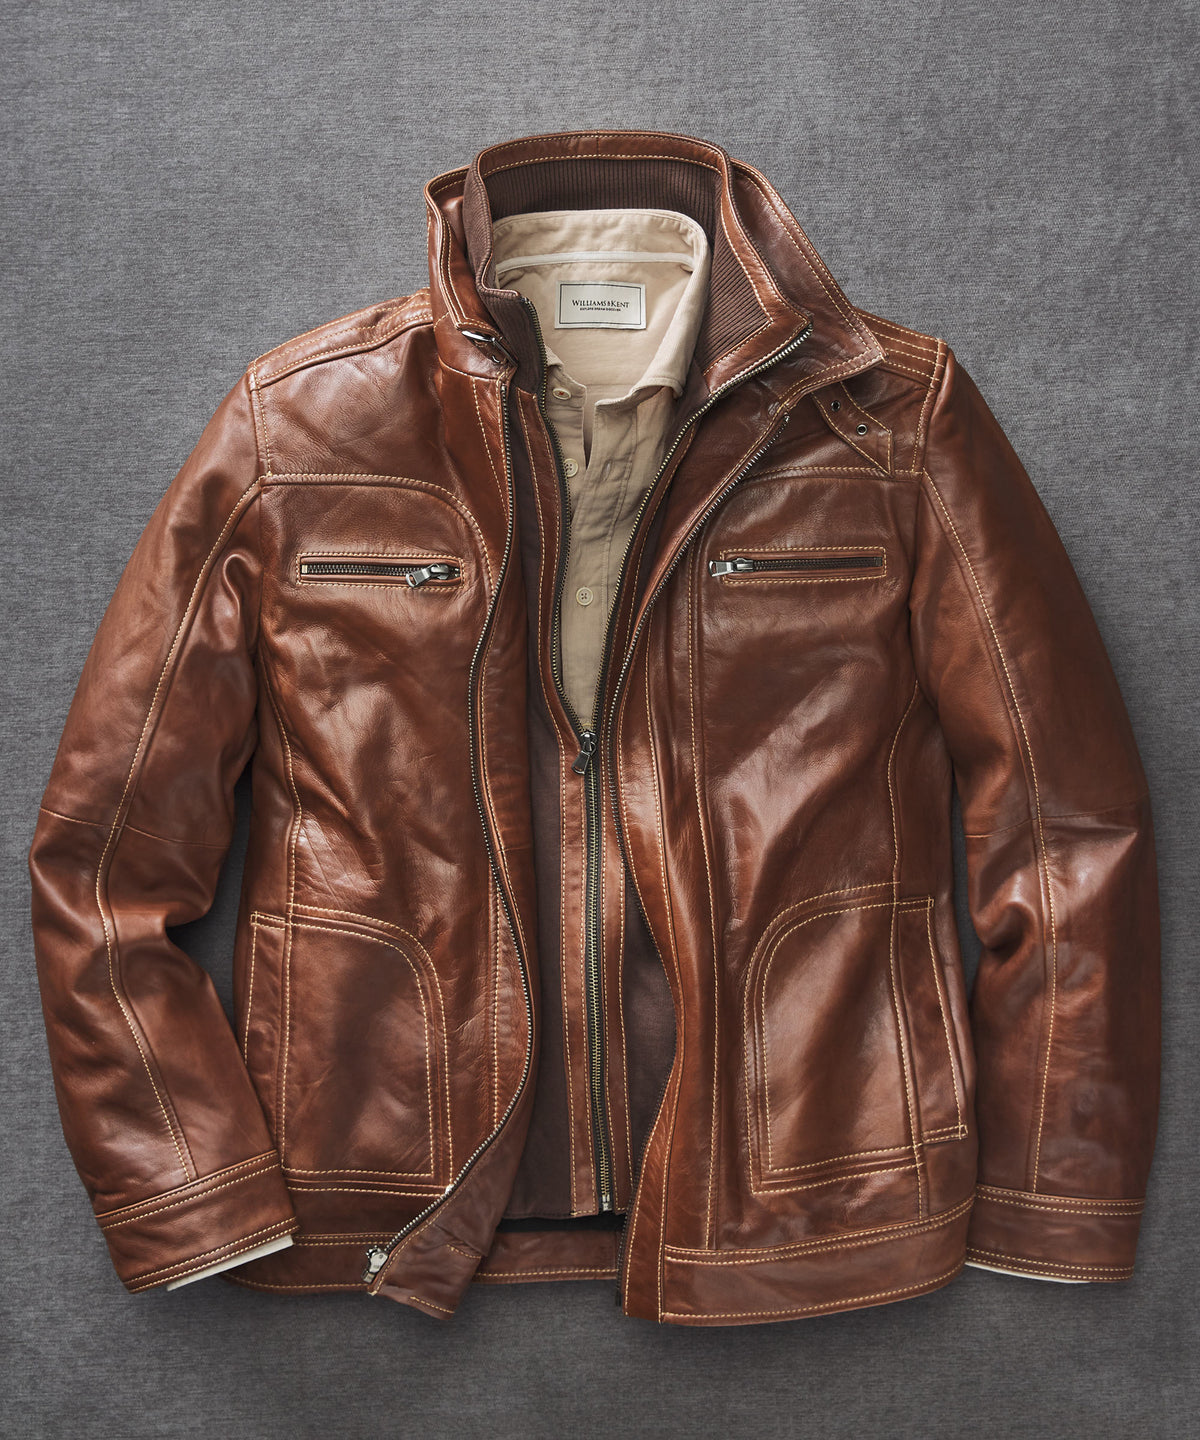 Memphis-B Leather Jacket with Removable Bib